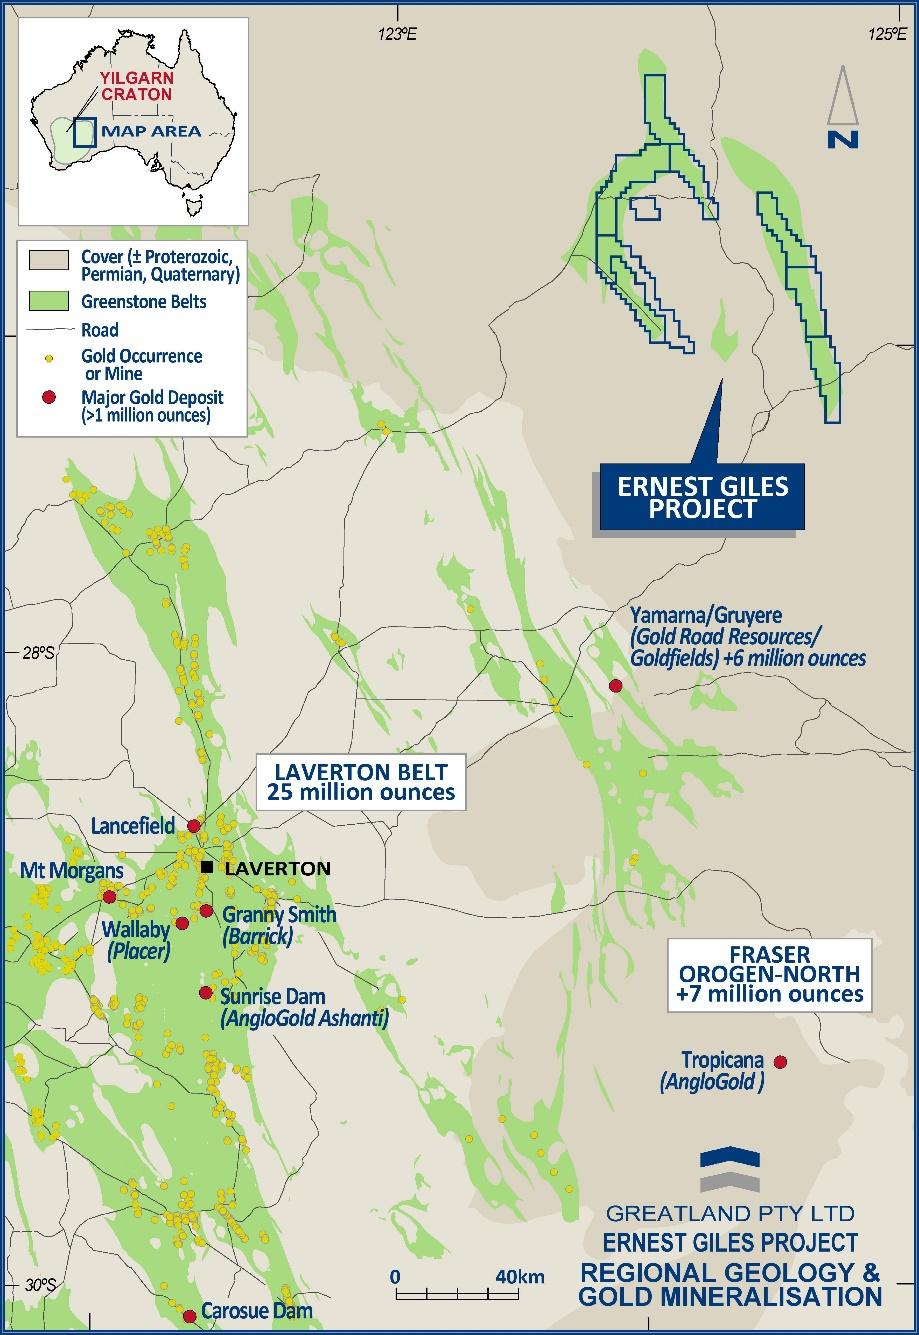 Ernest Giles covers an entire unexplored greenstone belt located 250 km north east of Laverton The project area covers an entire arcuate shaped greenstone sequence for over 100km of strike The